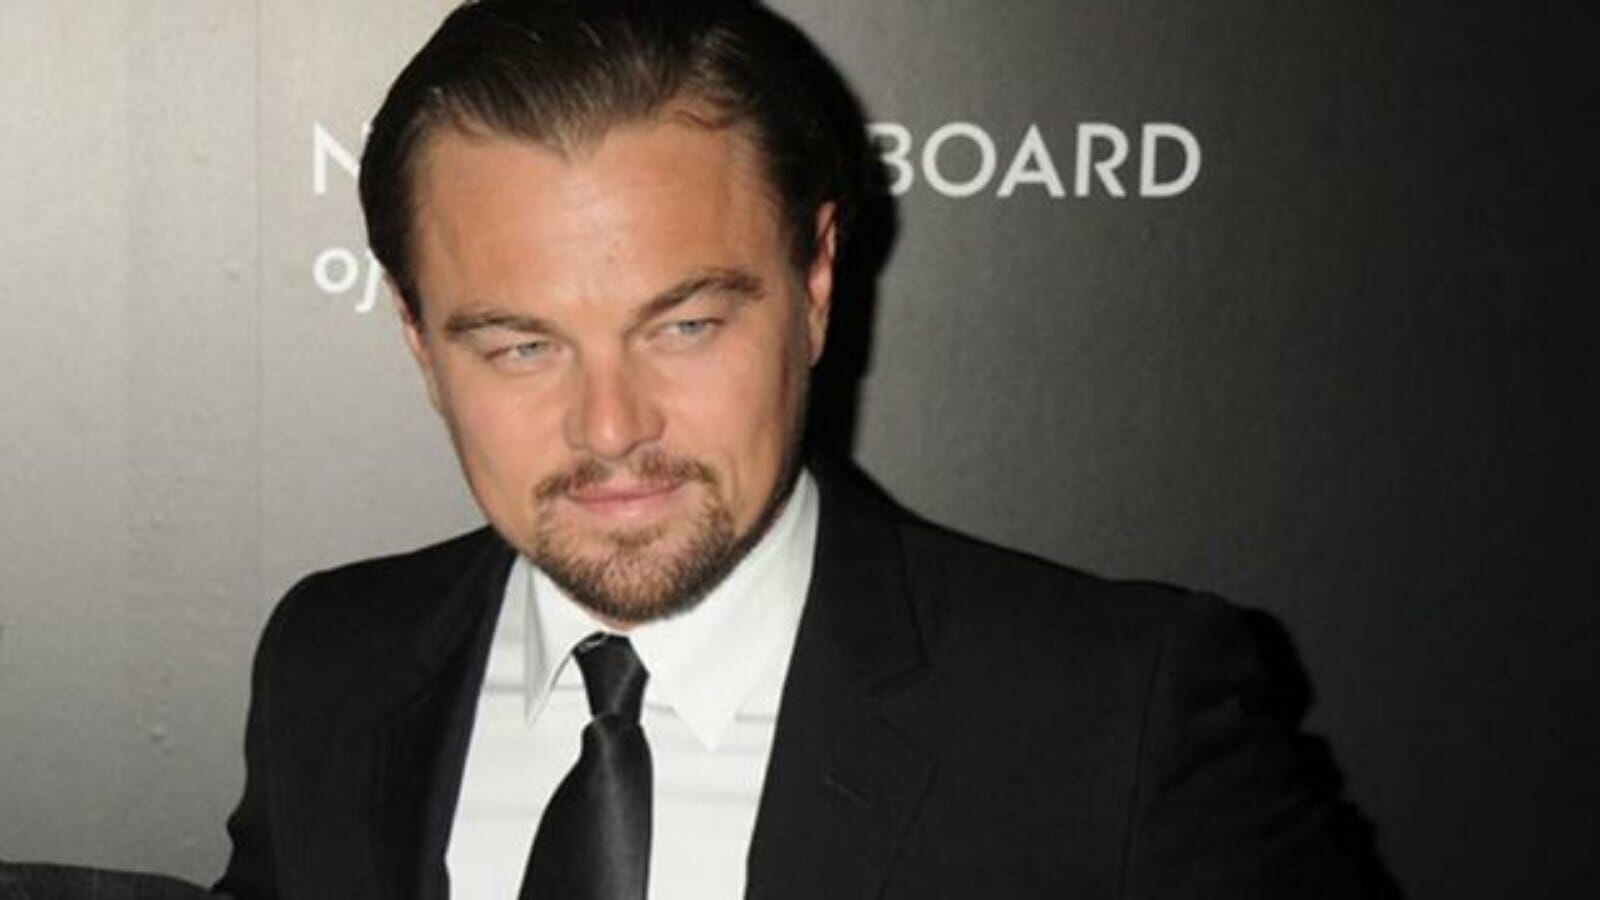 Why Did Leonardo DiCaprio Get His Secret Tattoo Removed? What Did It Mean?  - First Curiosity